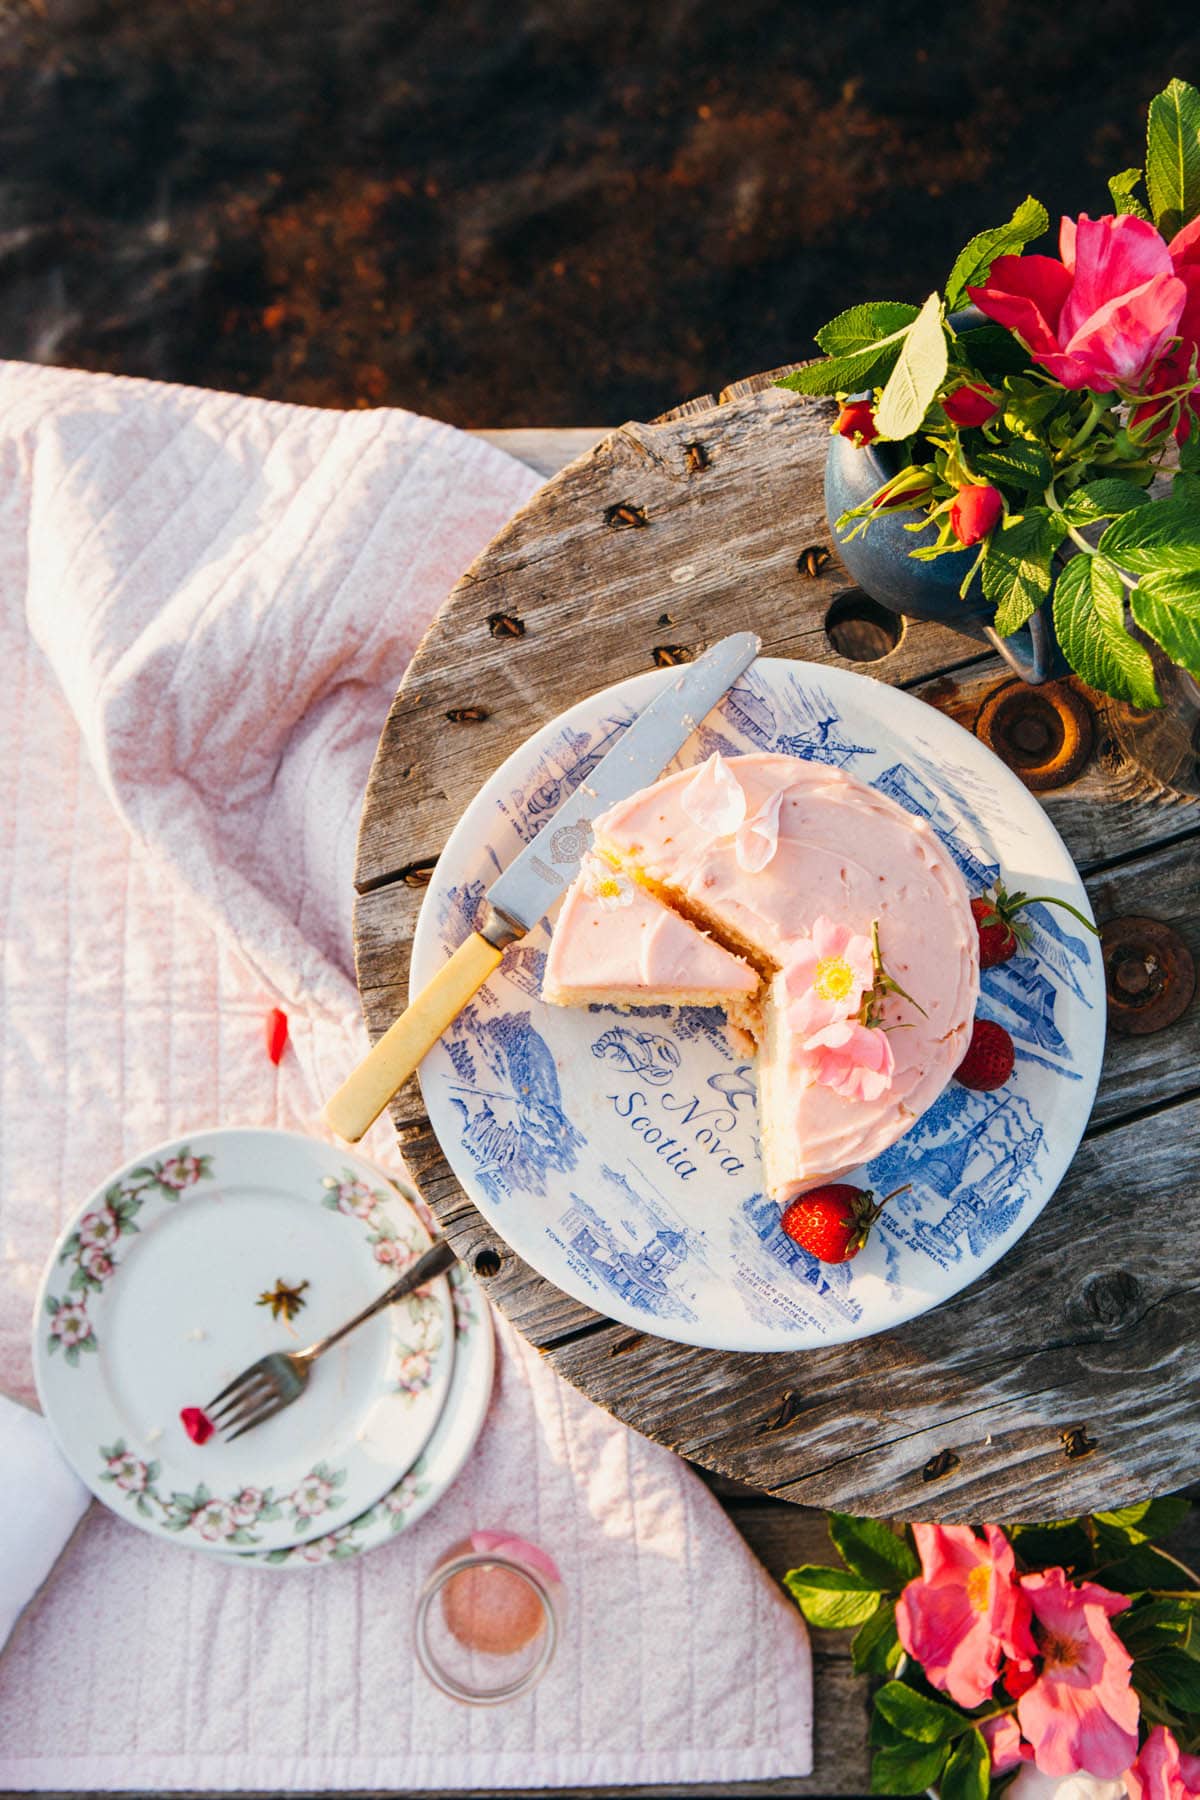 A sliced cake with pink frosting on a blue and white plate sitting on a weathered grey table on a lakeside dock.